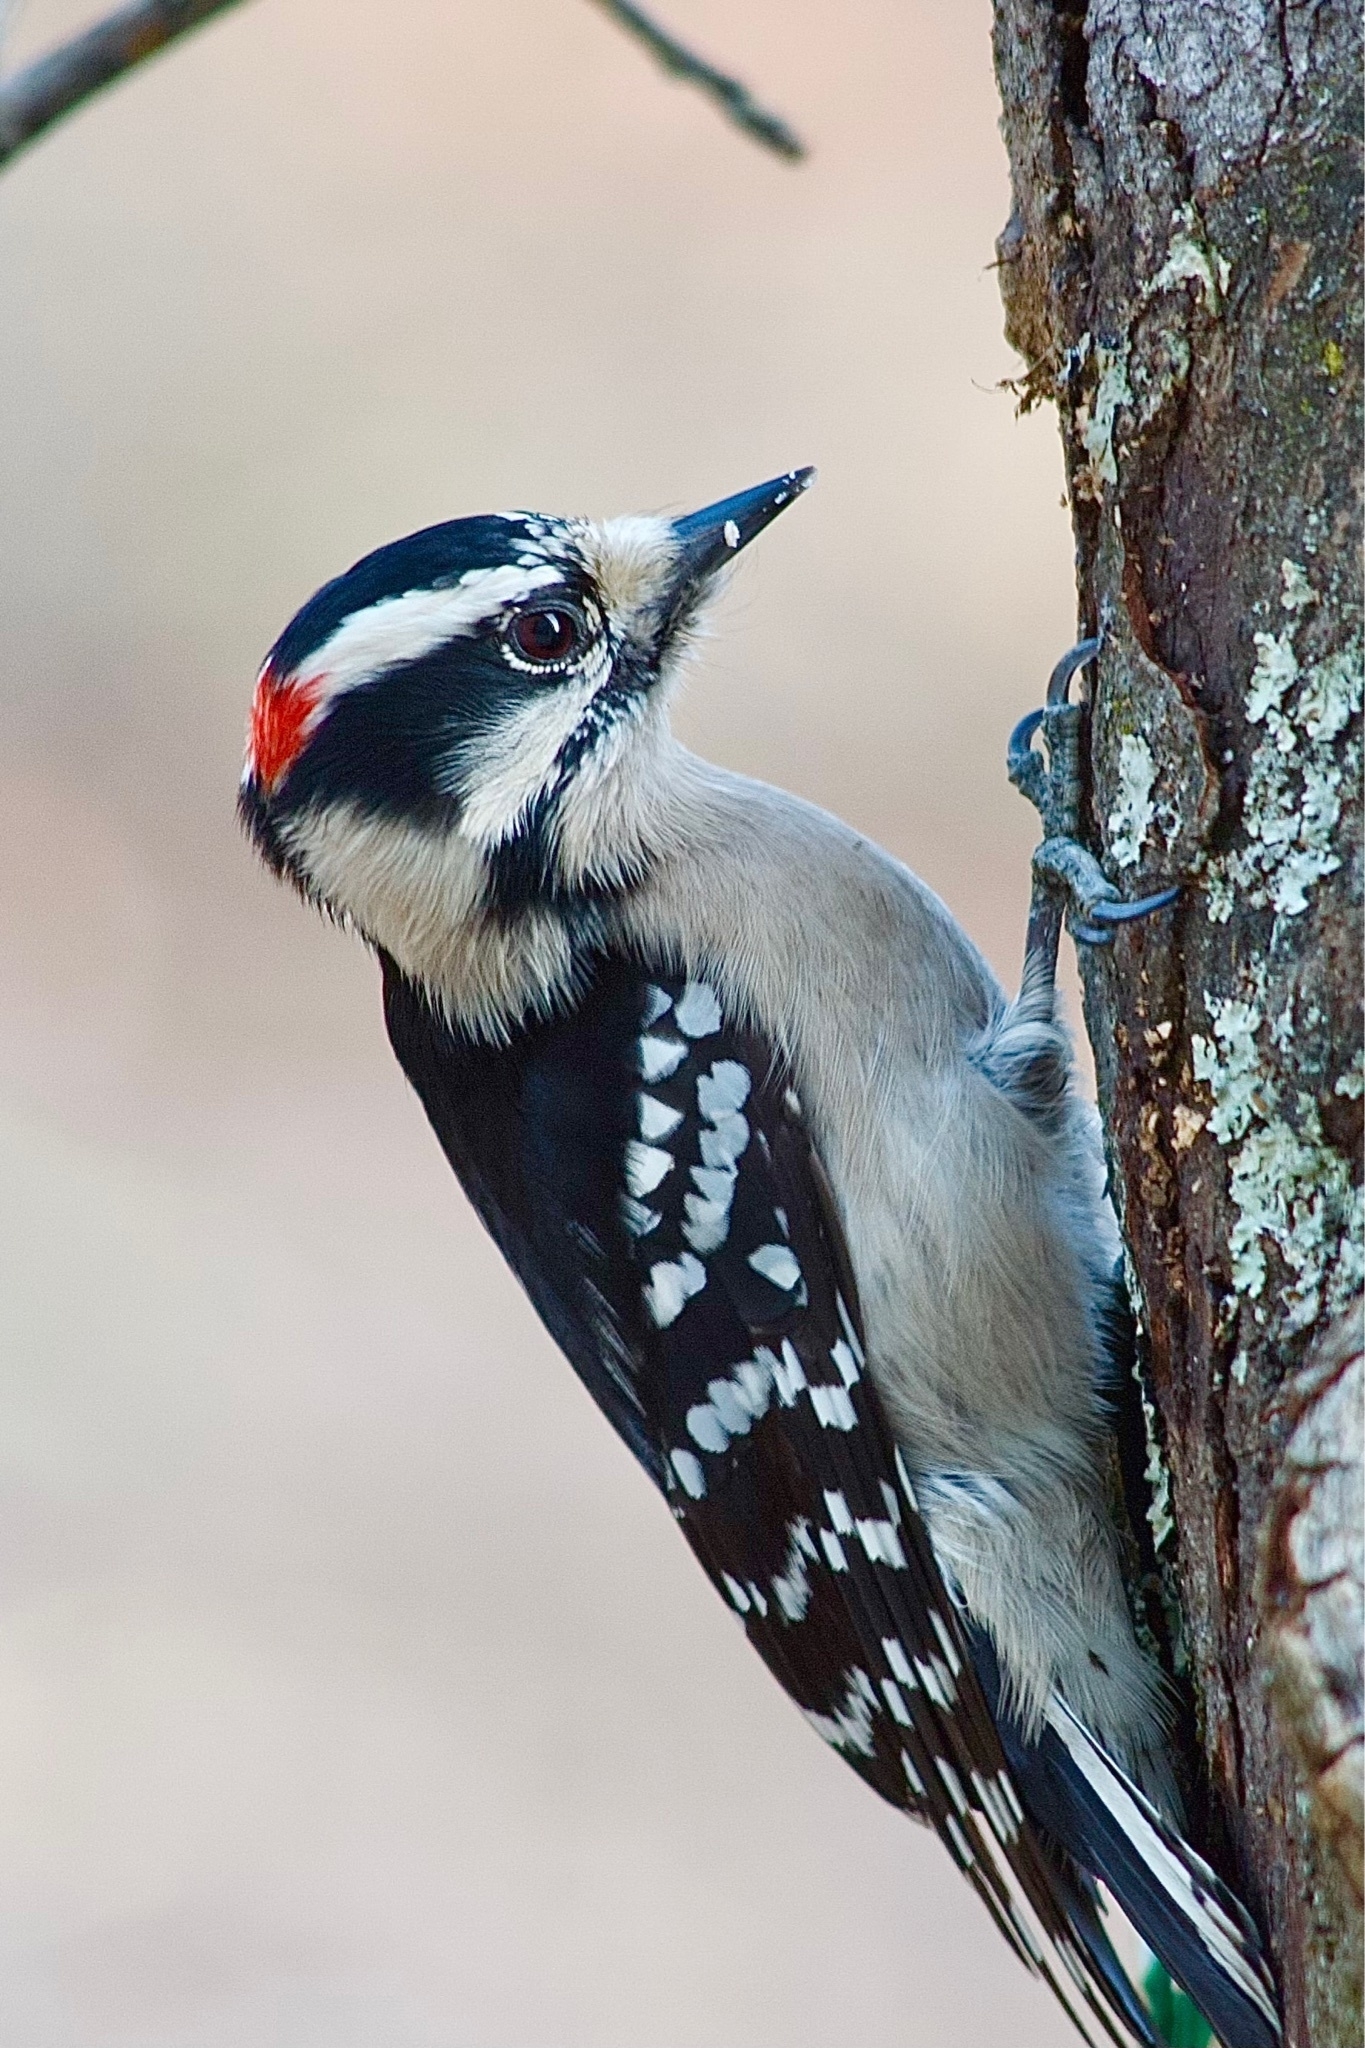 A bird is perched on the side of a tree. Black and white on the backside, white on the underside, it has a black and white head with alternating stripes and a small red cap on the back of its head.